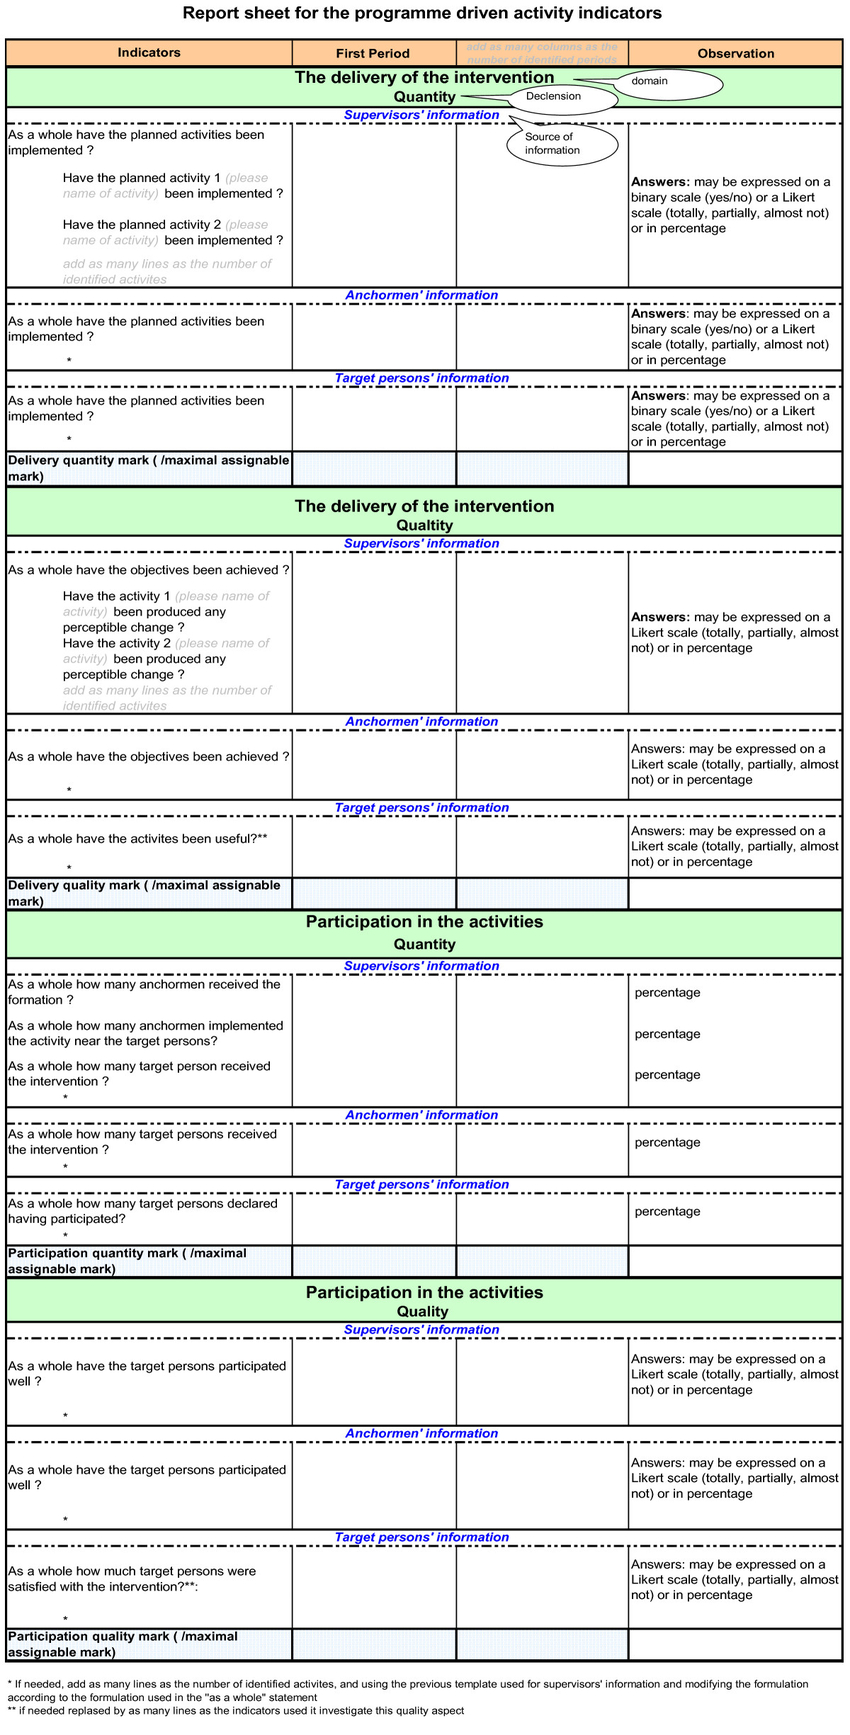 Template Of Indicators Report Sheet. | Download Scientific Throughout Intervention Report Template